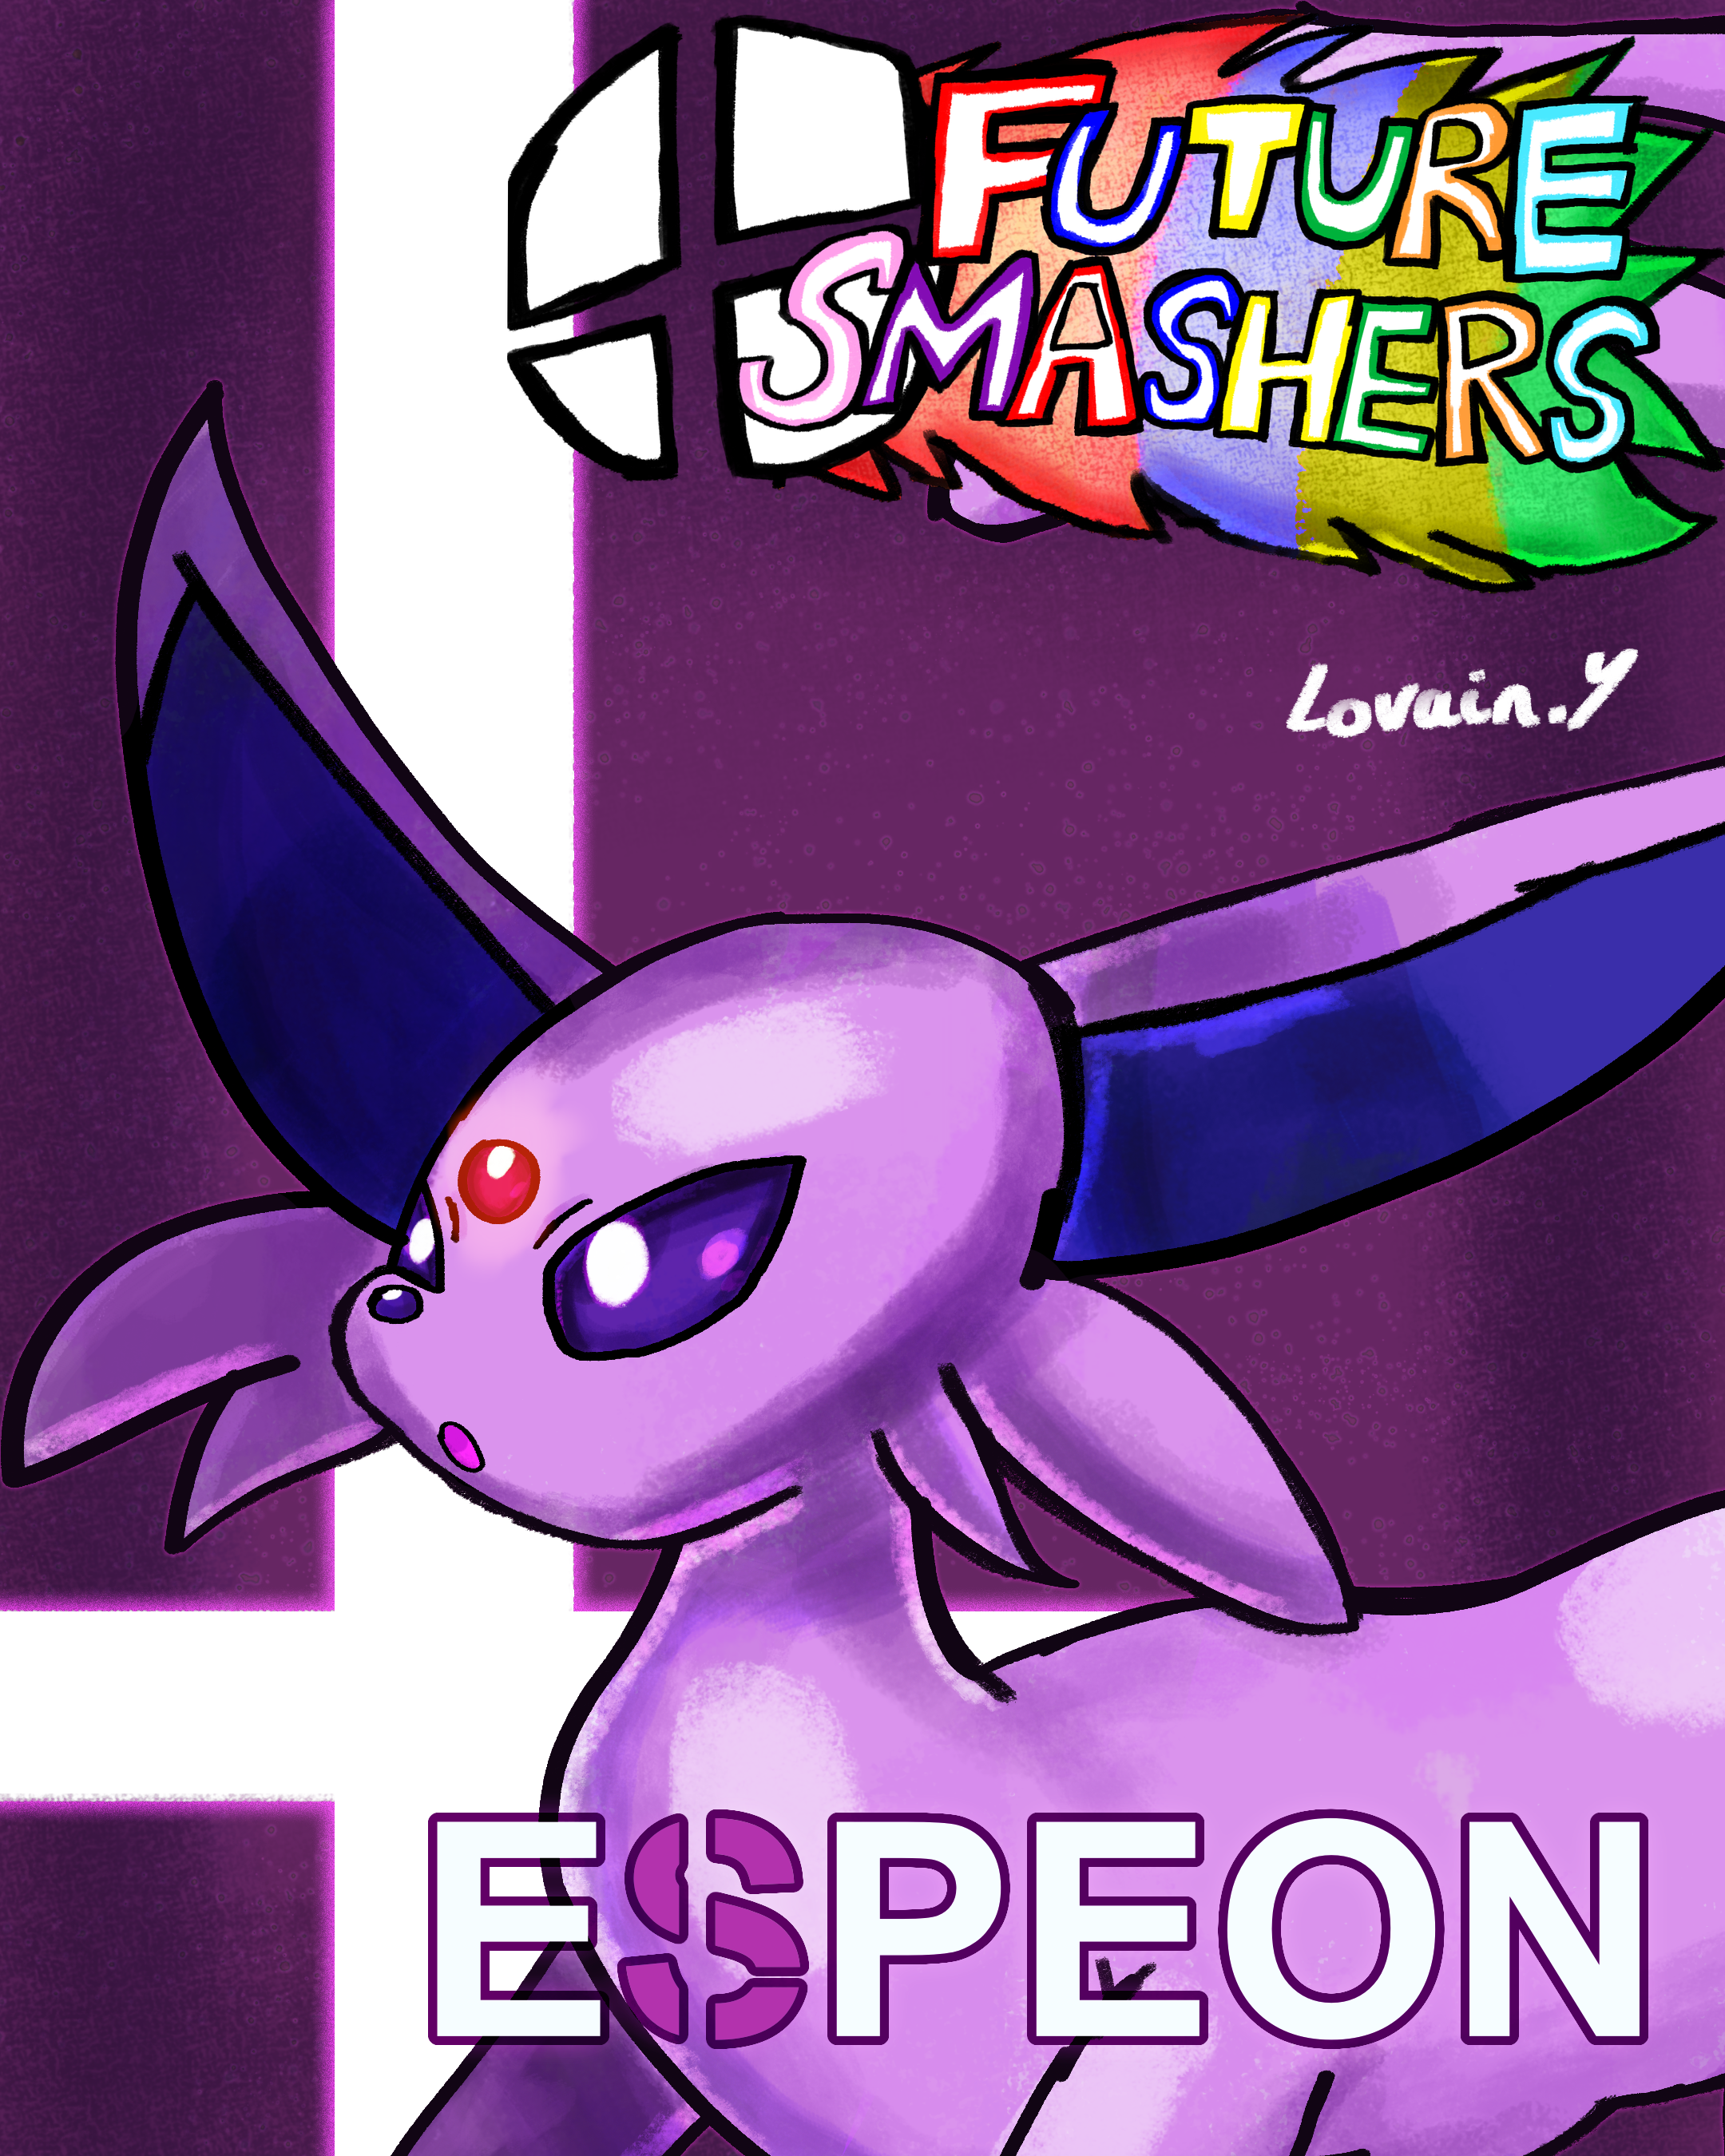 Espeon: How To Get And Evolution  Pokemon Legends Arceus - GameWith